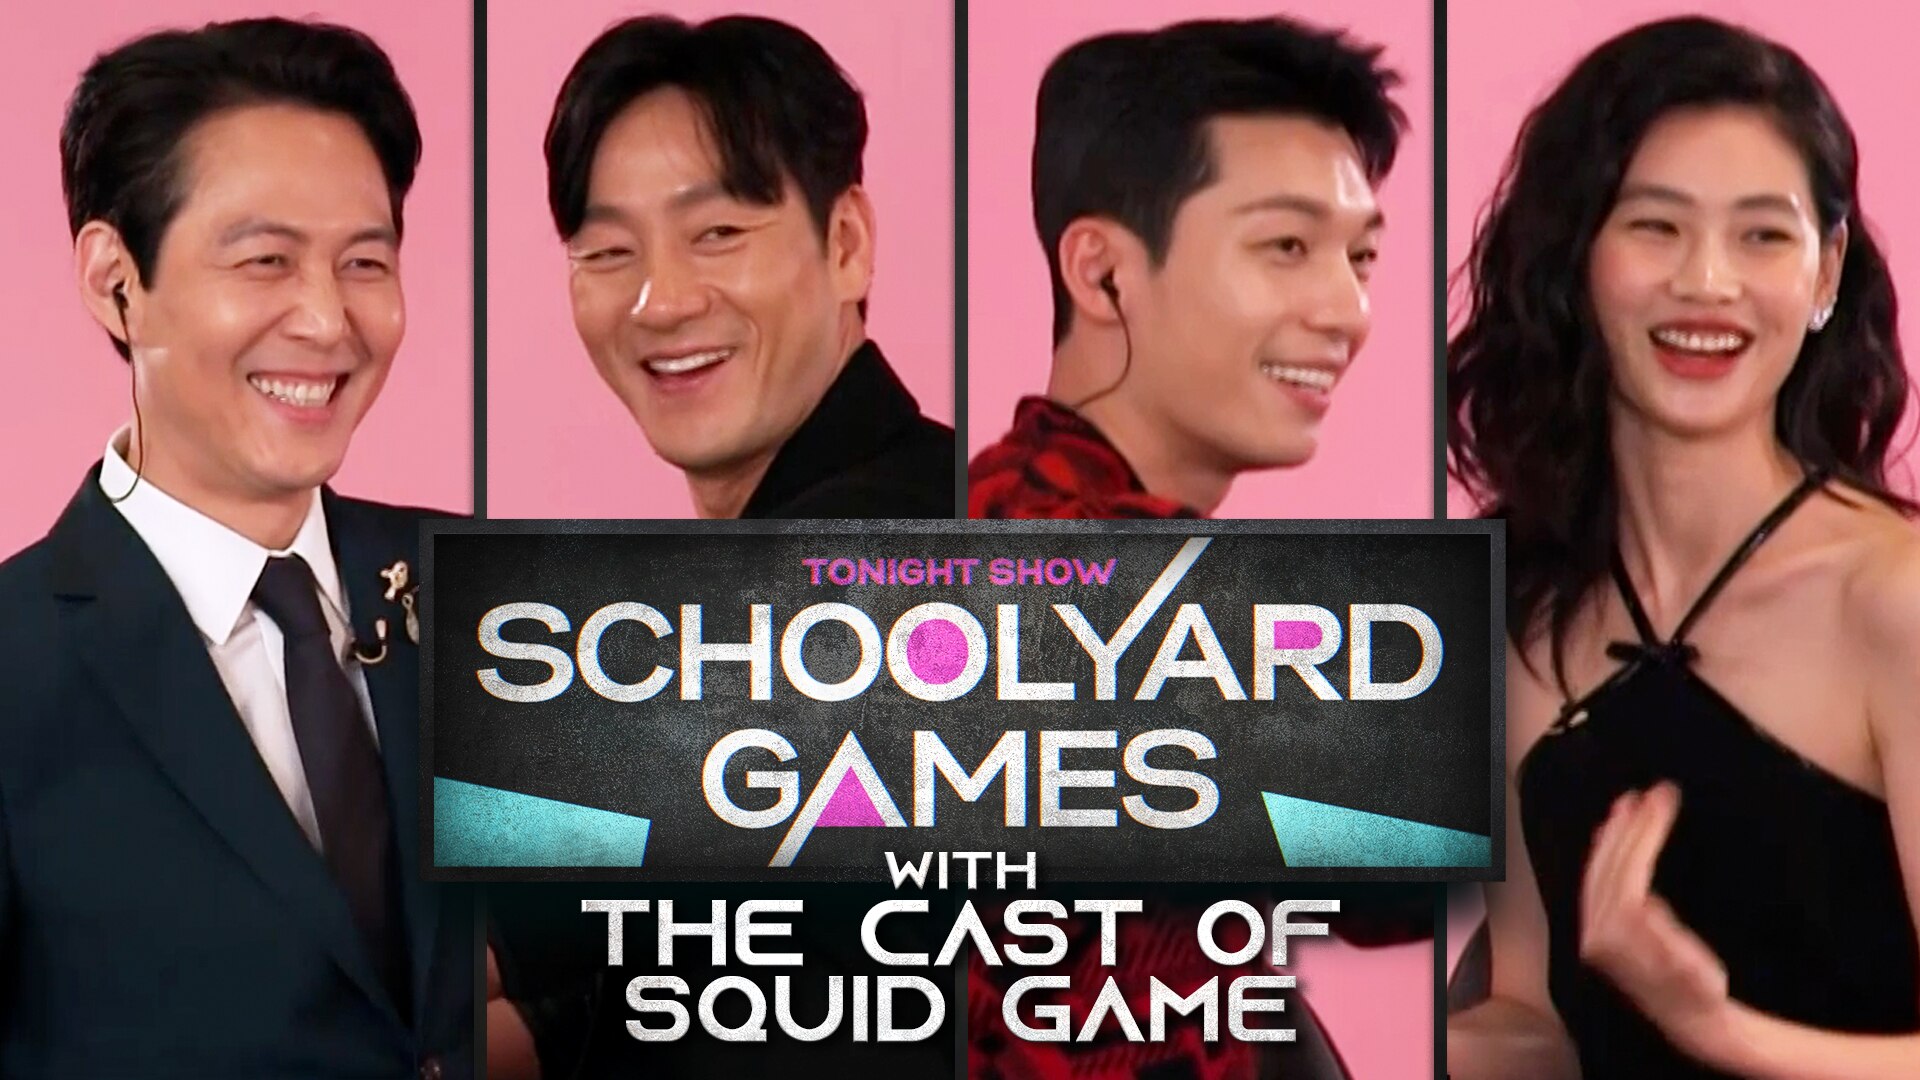 Squid Game' cast to appear on Jimmy Fallon show